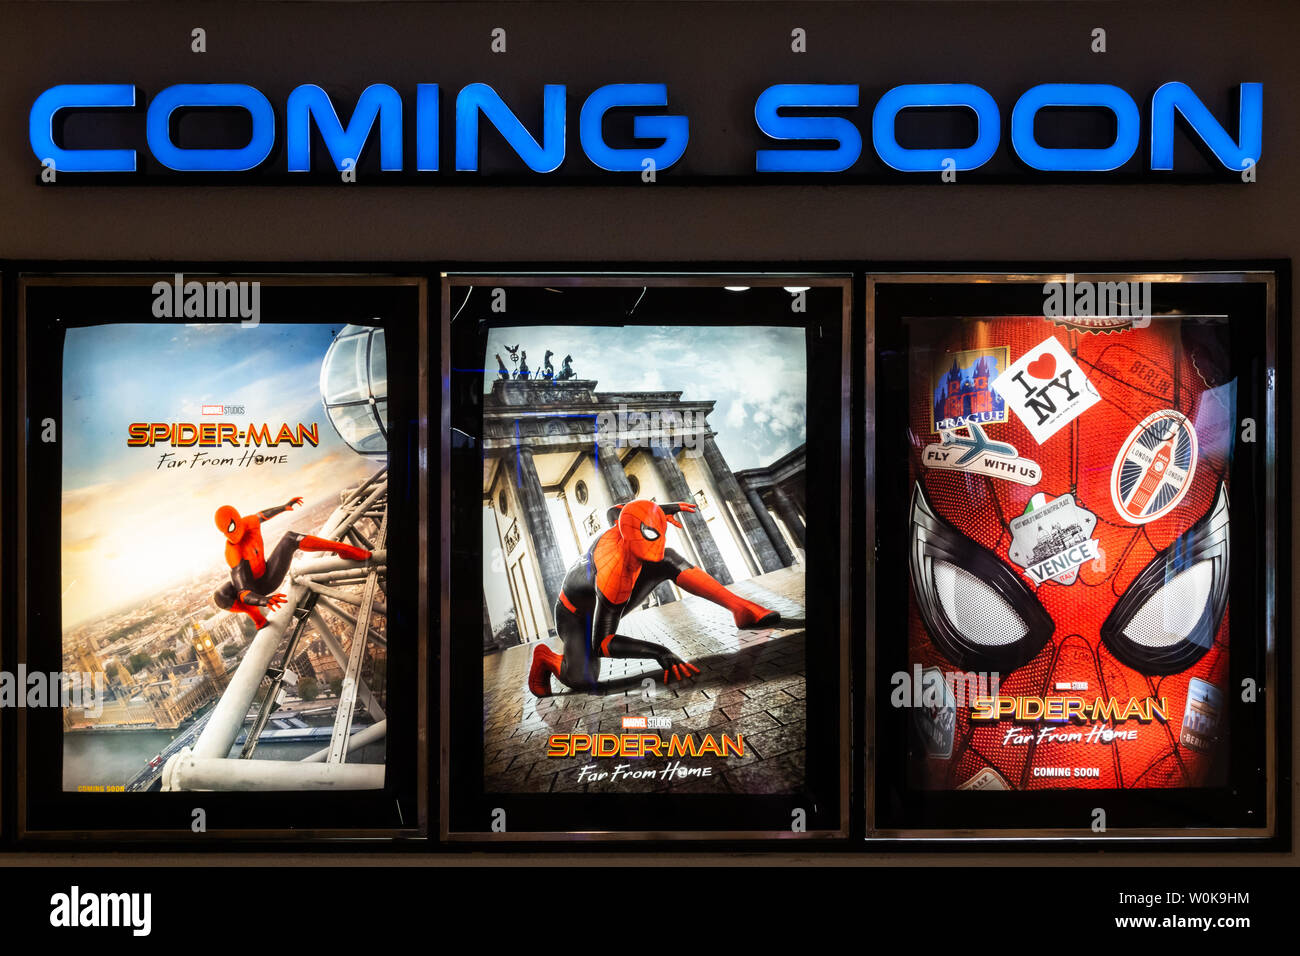 Bangkok, Thailand - Jun 26, 2019: Spider-Man: Far From Home movie poster with coming soon display showing in theatre. Cinema promotional advertisement Stock Photo